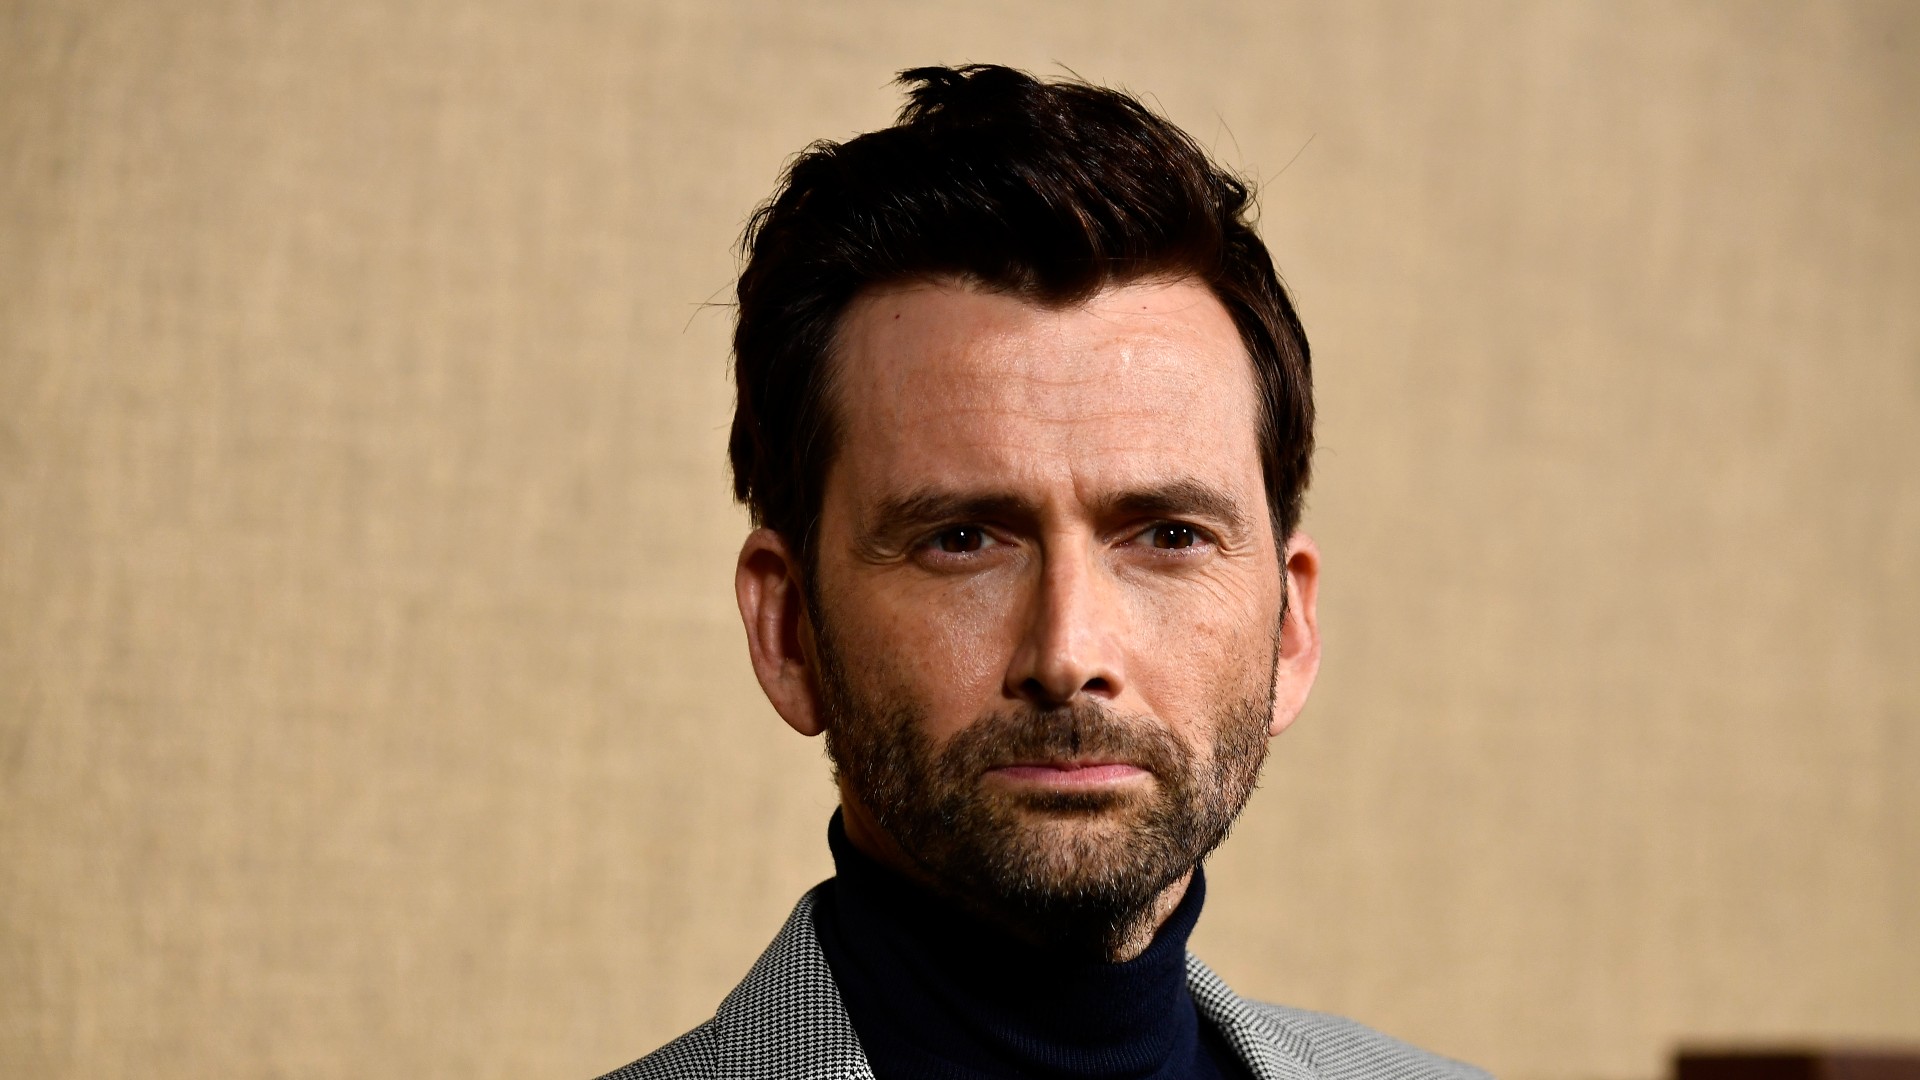 David Tennant Wins International Emmy Award for His Chilling Performance in 'Des'